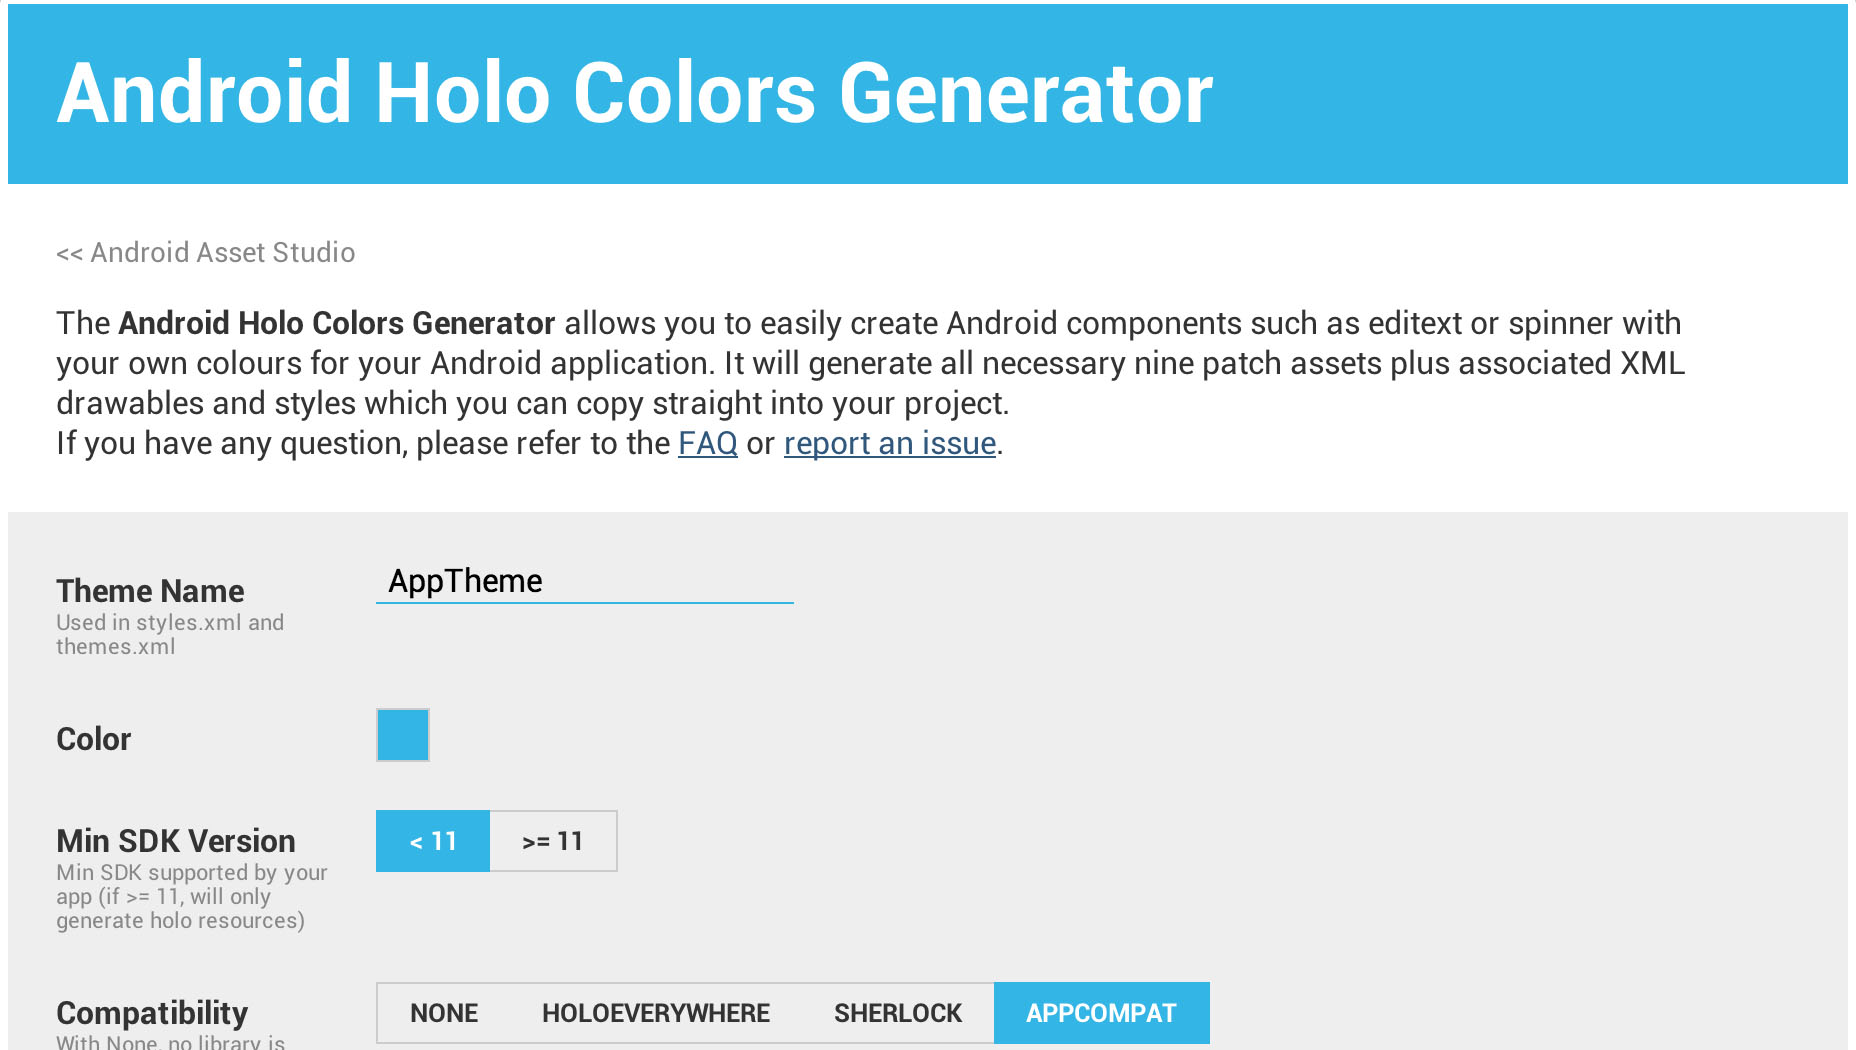 Android Holo Colors Generator